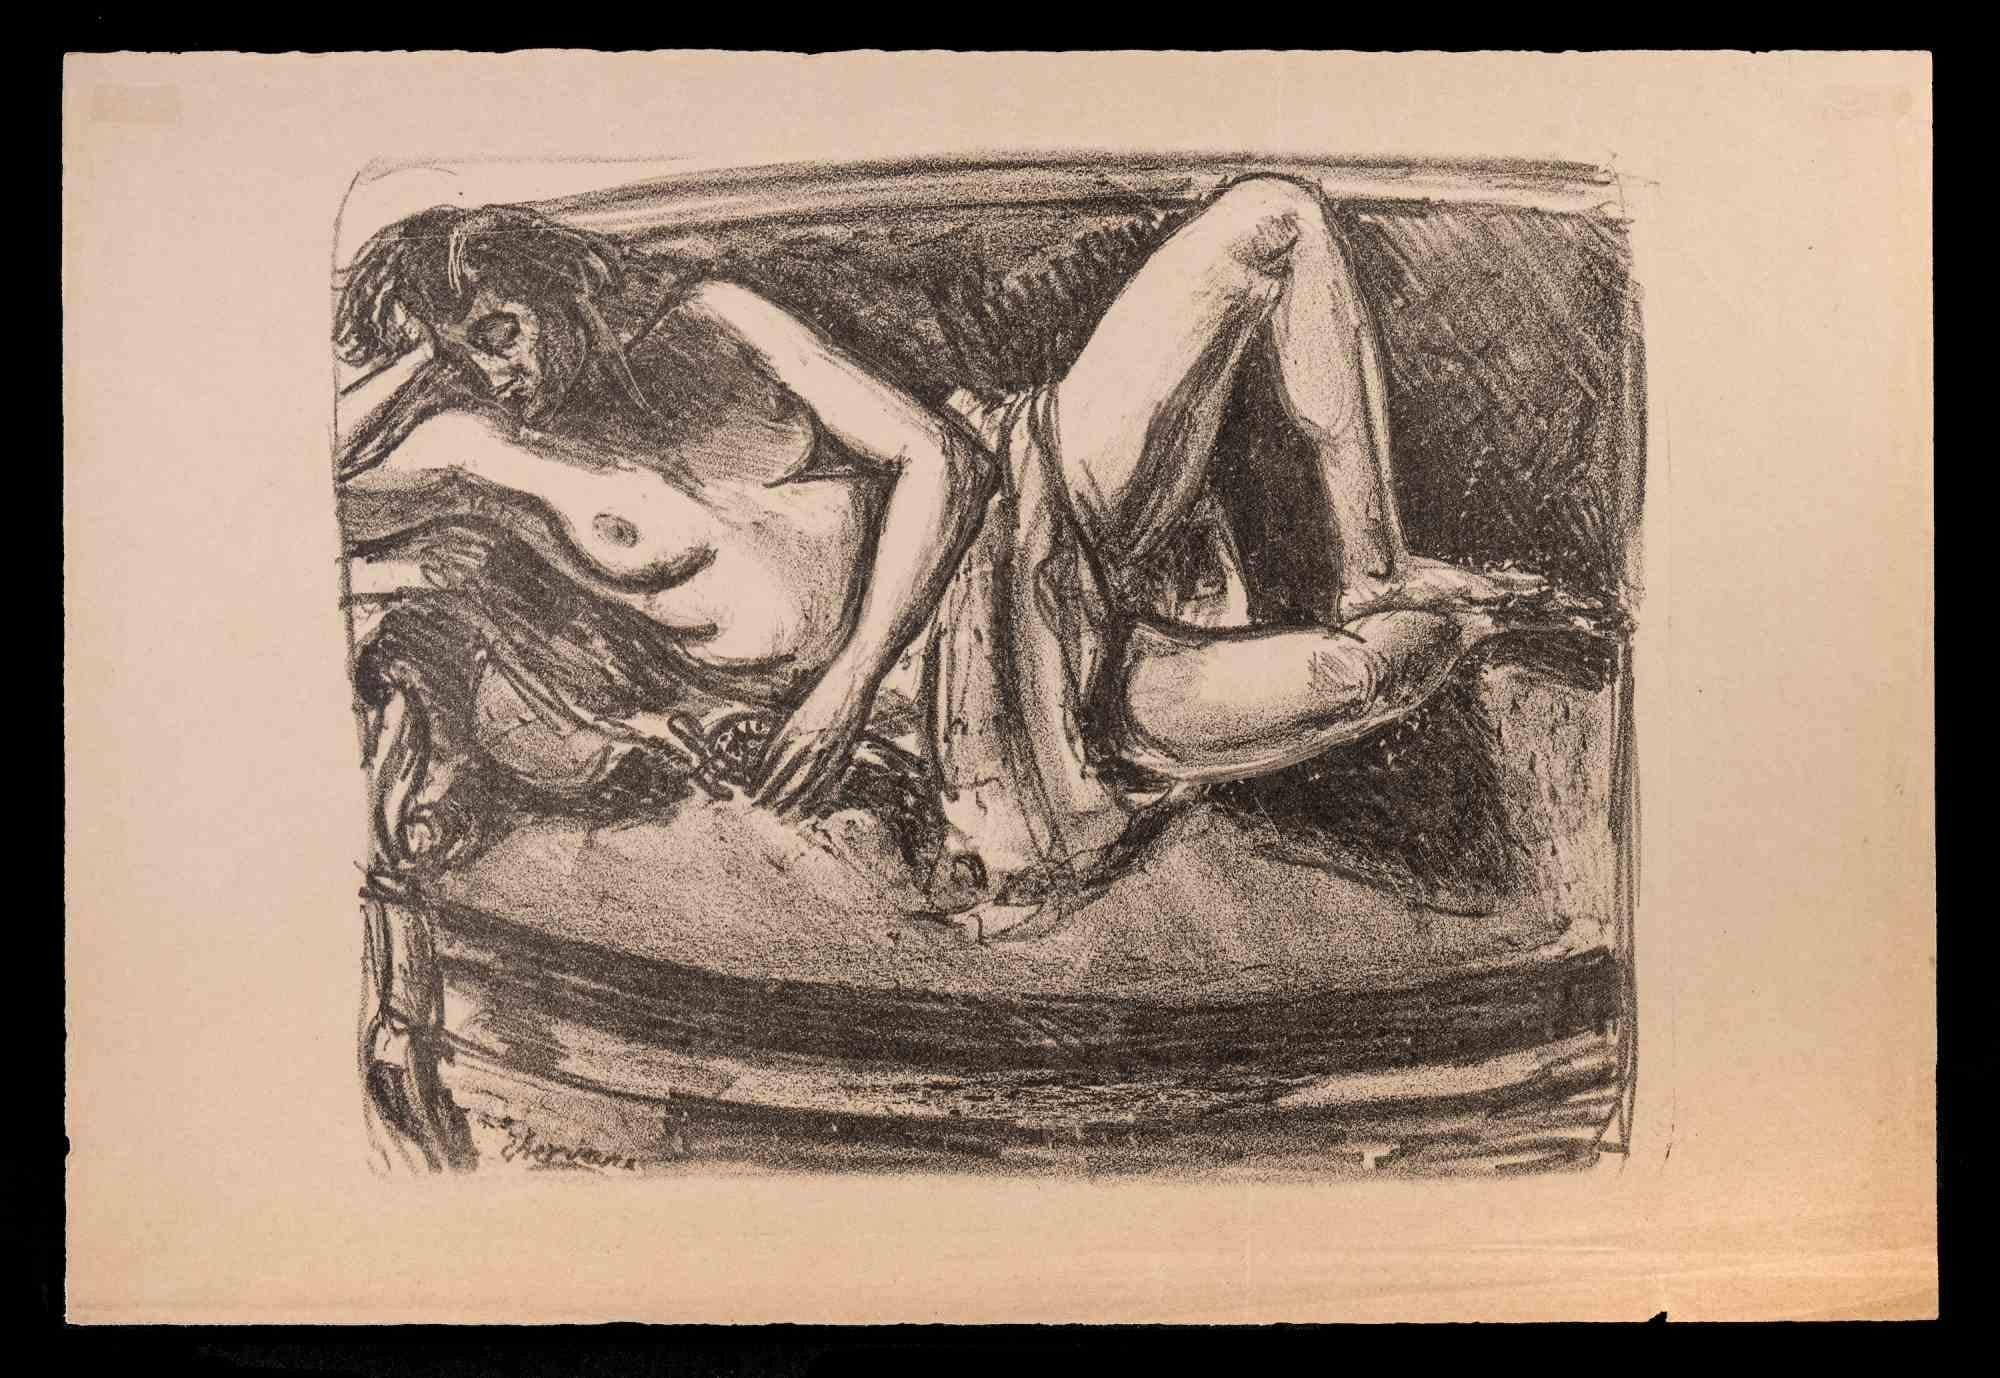 Nude of Woman - Original Lithograph by Louise Hervieu - Early 20th Century